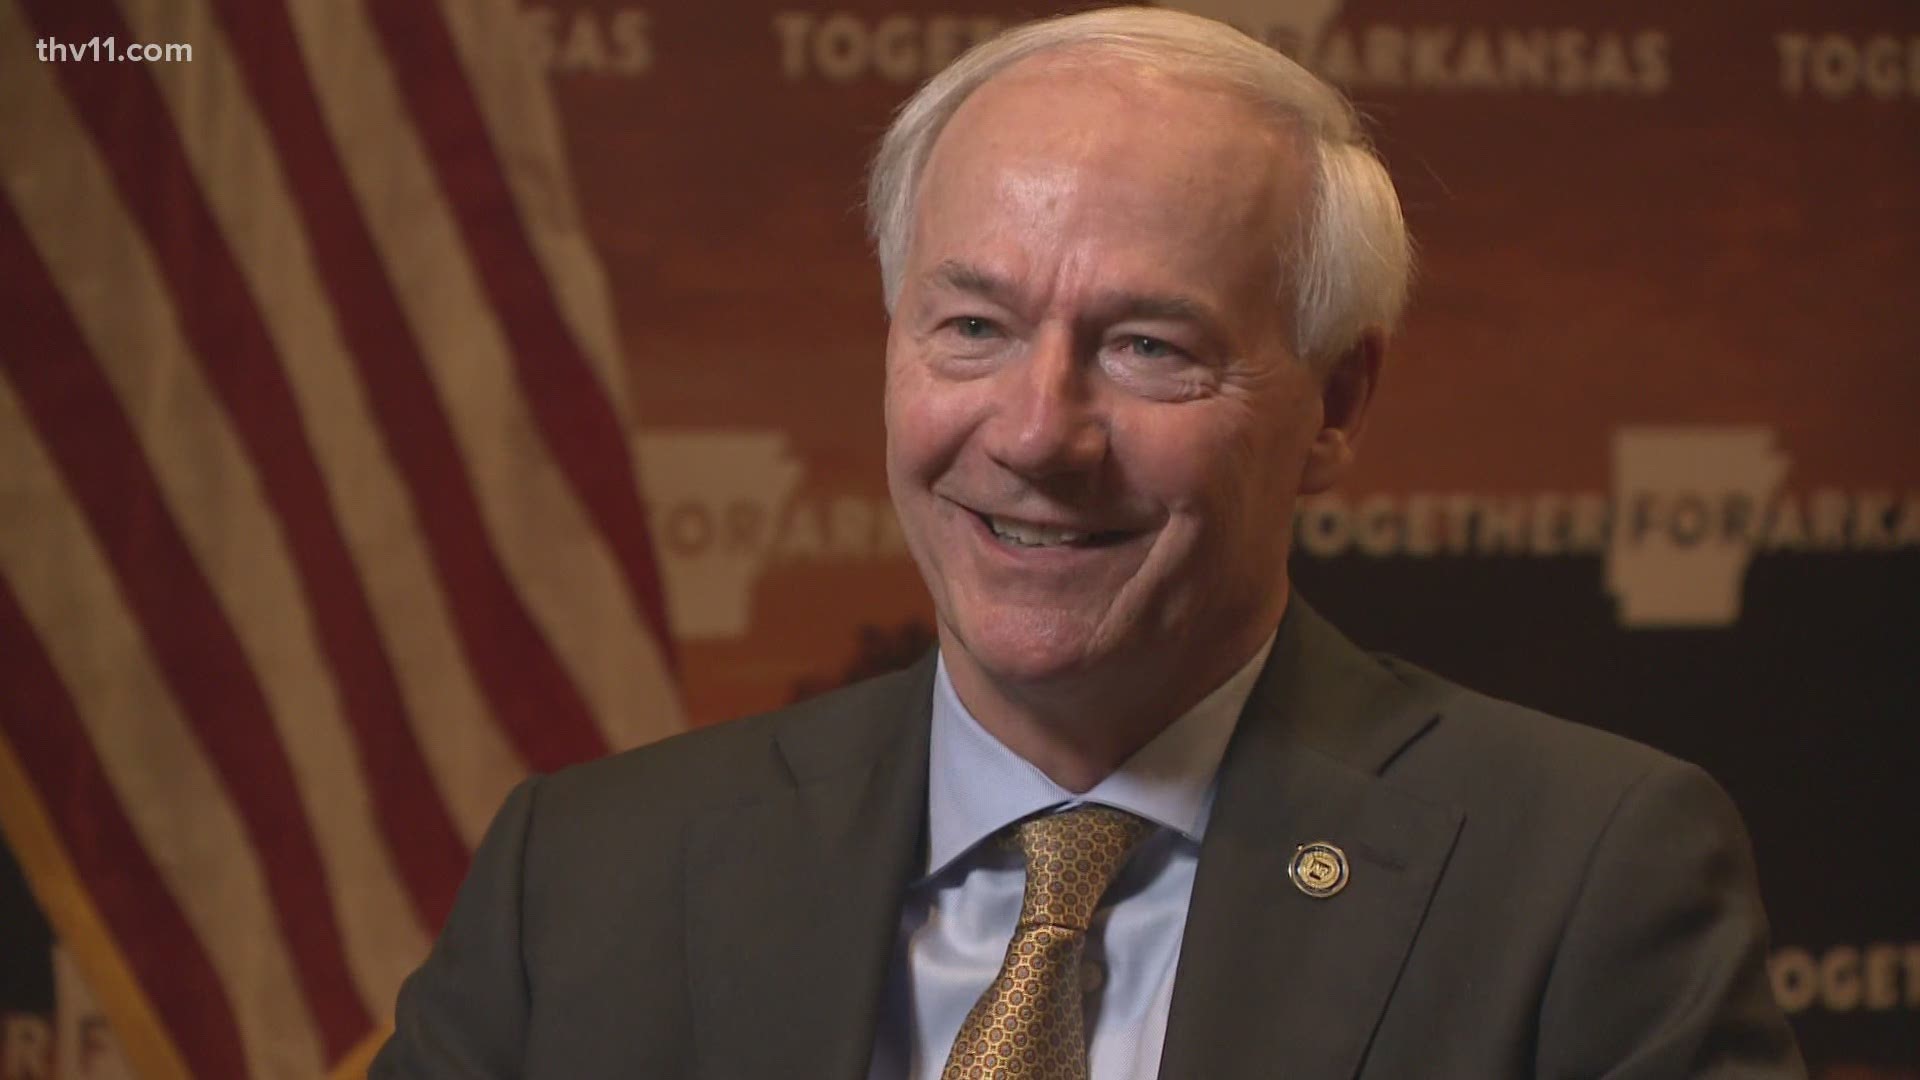 Arkansas Governor Asa Hutchinson has led a COVID-19 press briefing nearly every single day,	but that's about to change.